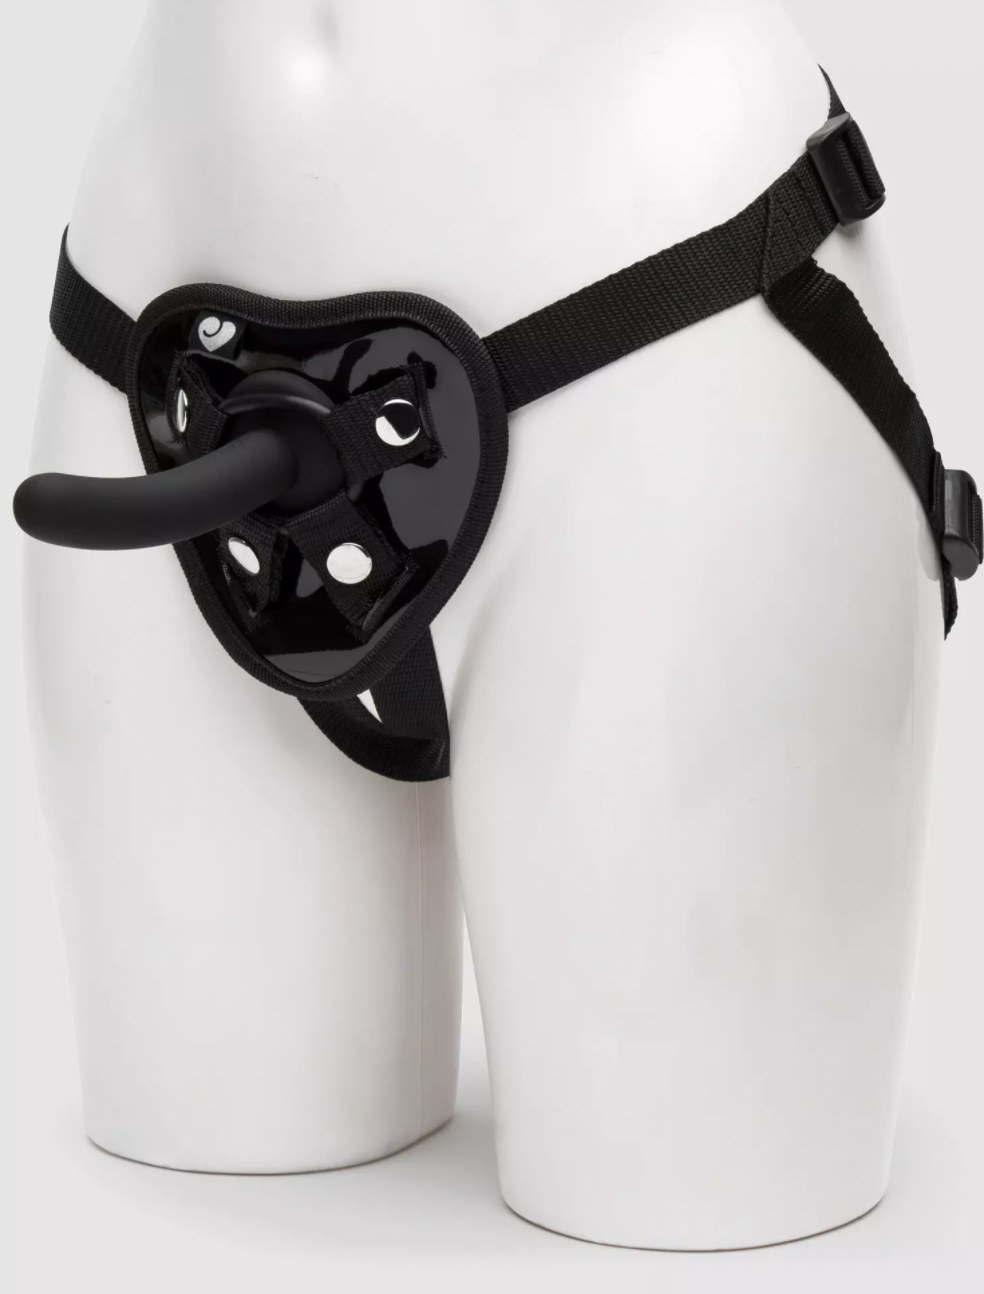 The black harness with pegging dildo